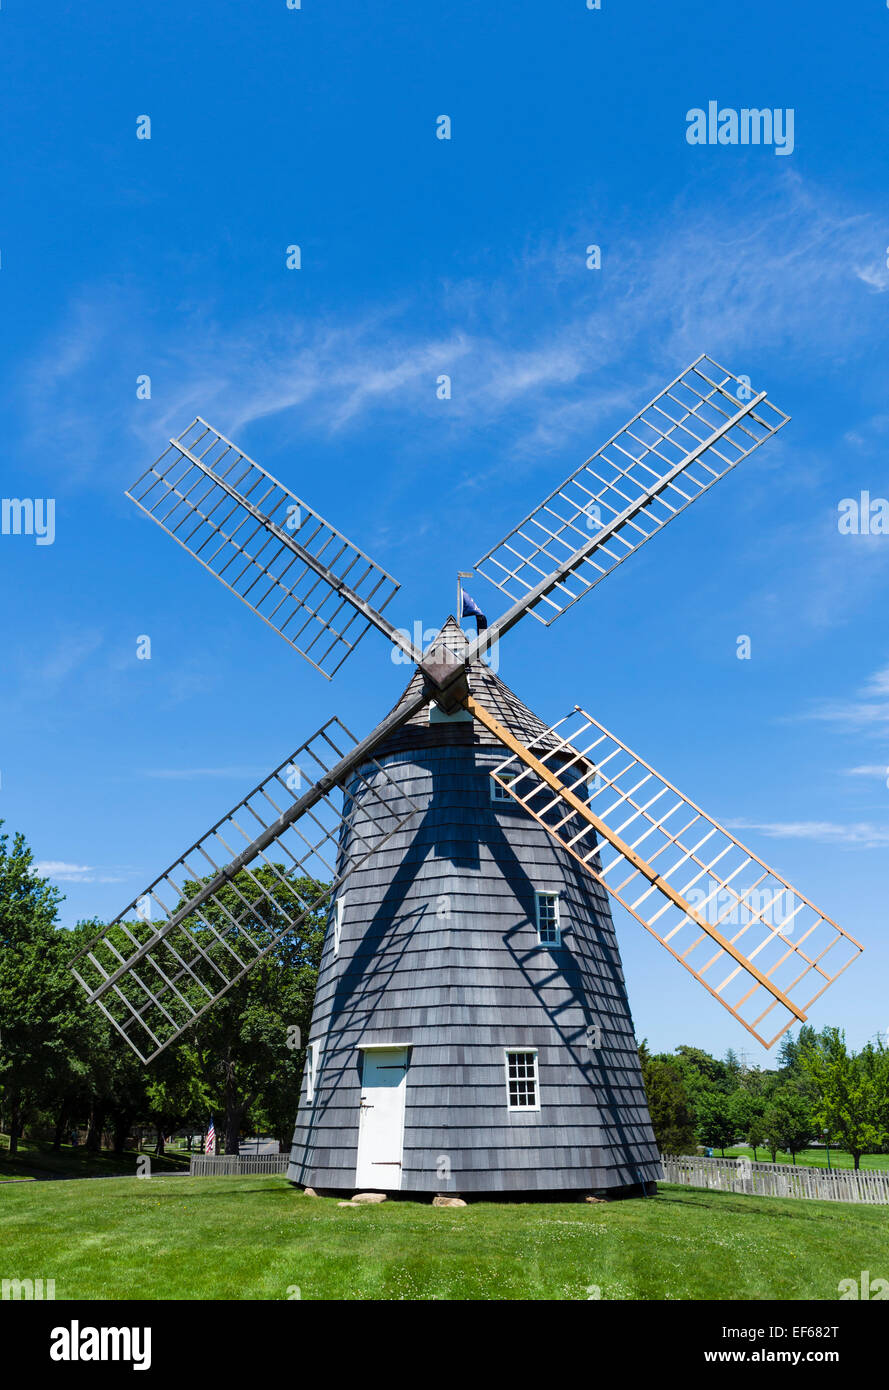 The Old Hook Windmill in the village of East Hampton, Suffolk County, Long Island , NY, USA Stock Photo